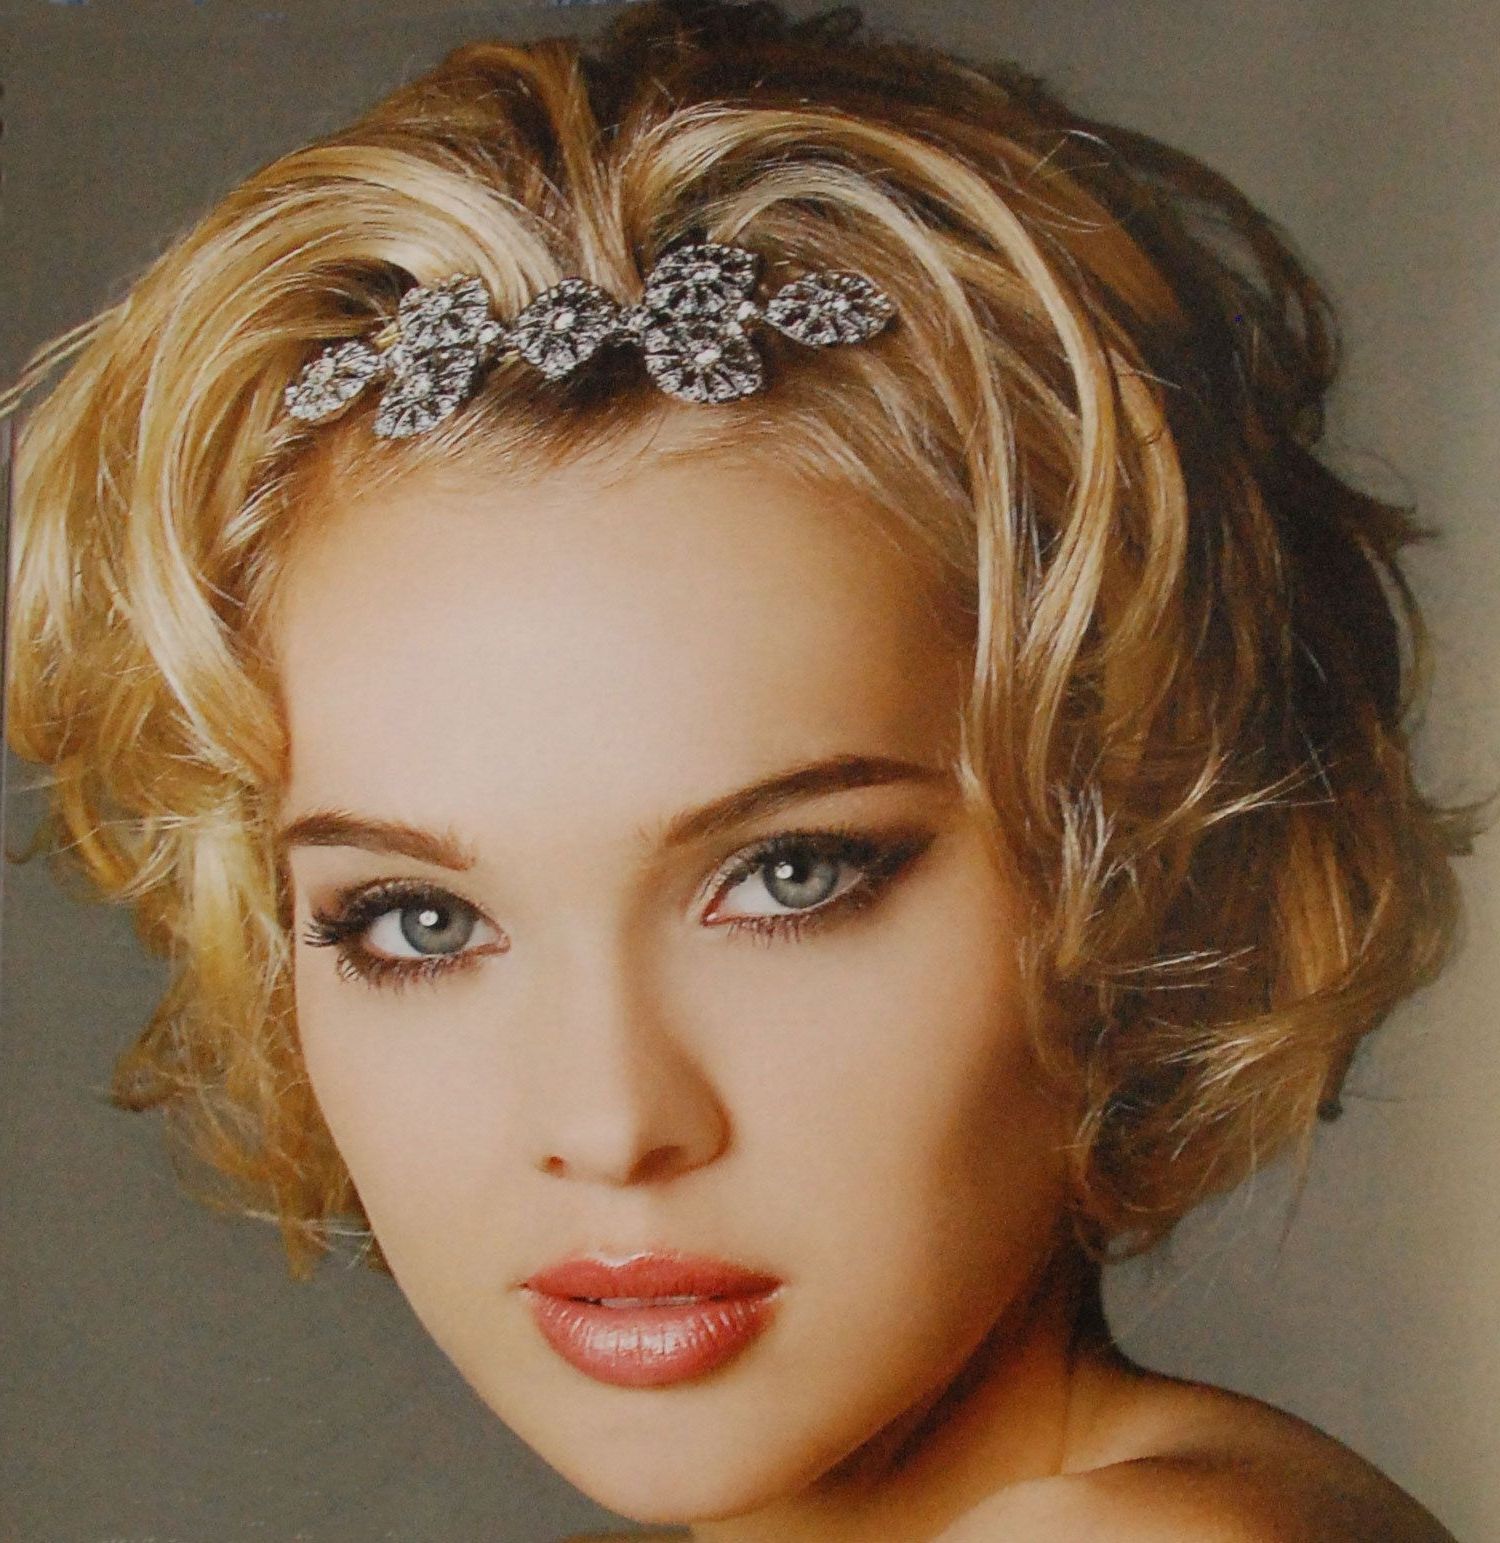 Wedding Hairstyles, Are You Looking To Steal The Show? These Are Not Throughout 2018 Wedding Hairstyles For Short Brown Hair (View 6 of 15)